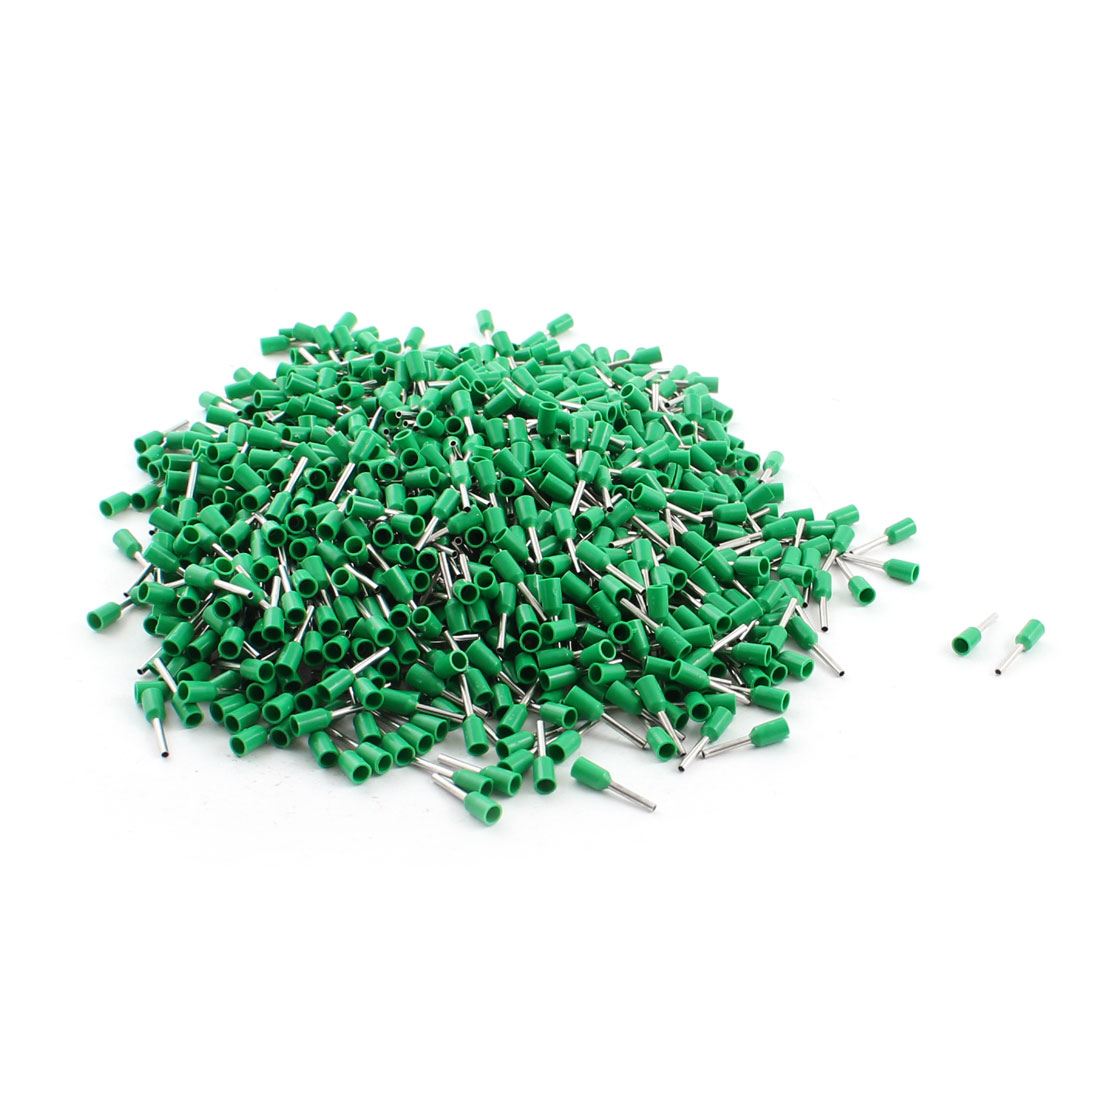 Unique Bargains 1000 Pieces E0508 0.5mm2 Wire Green Insulated Tublar Tube Ends Terminals